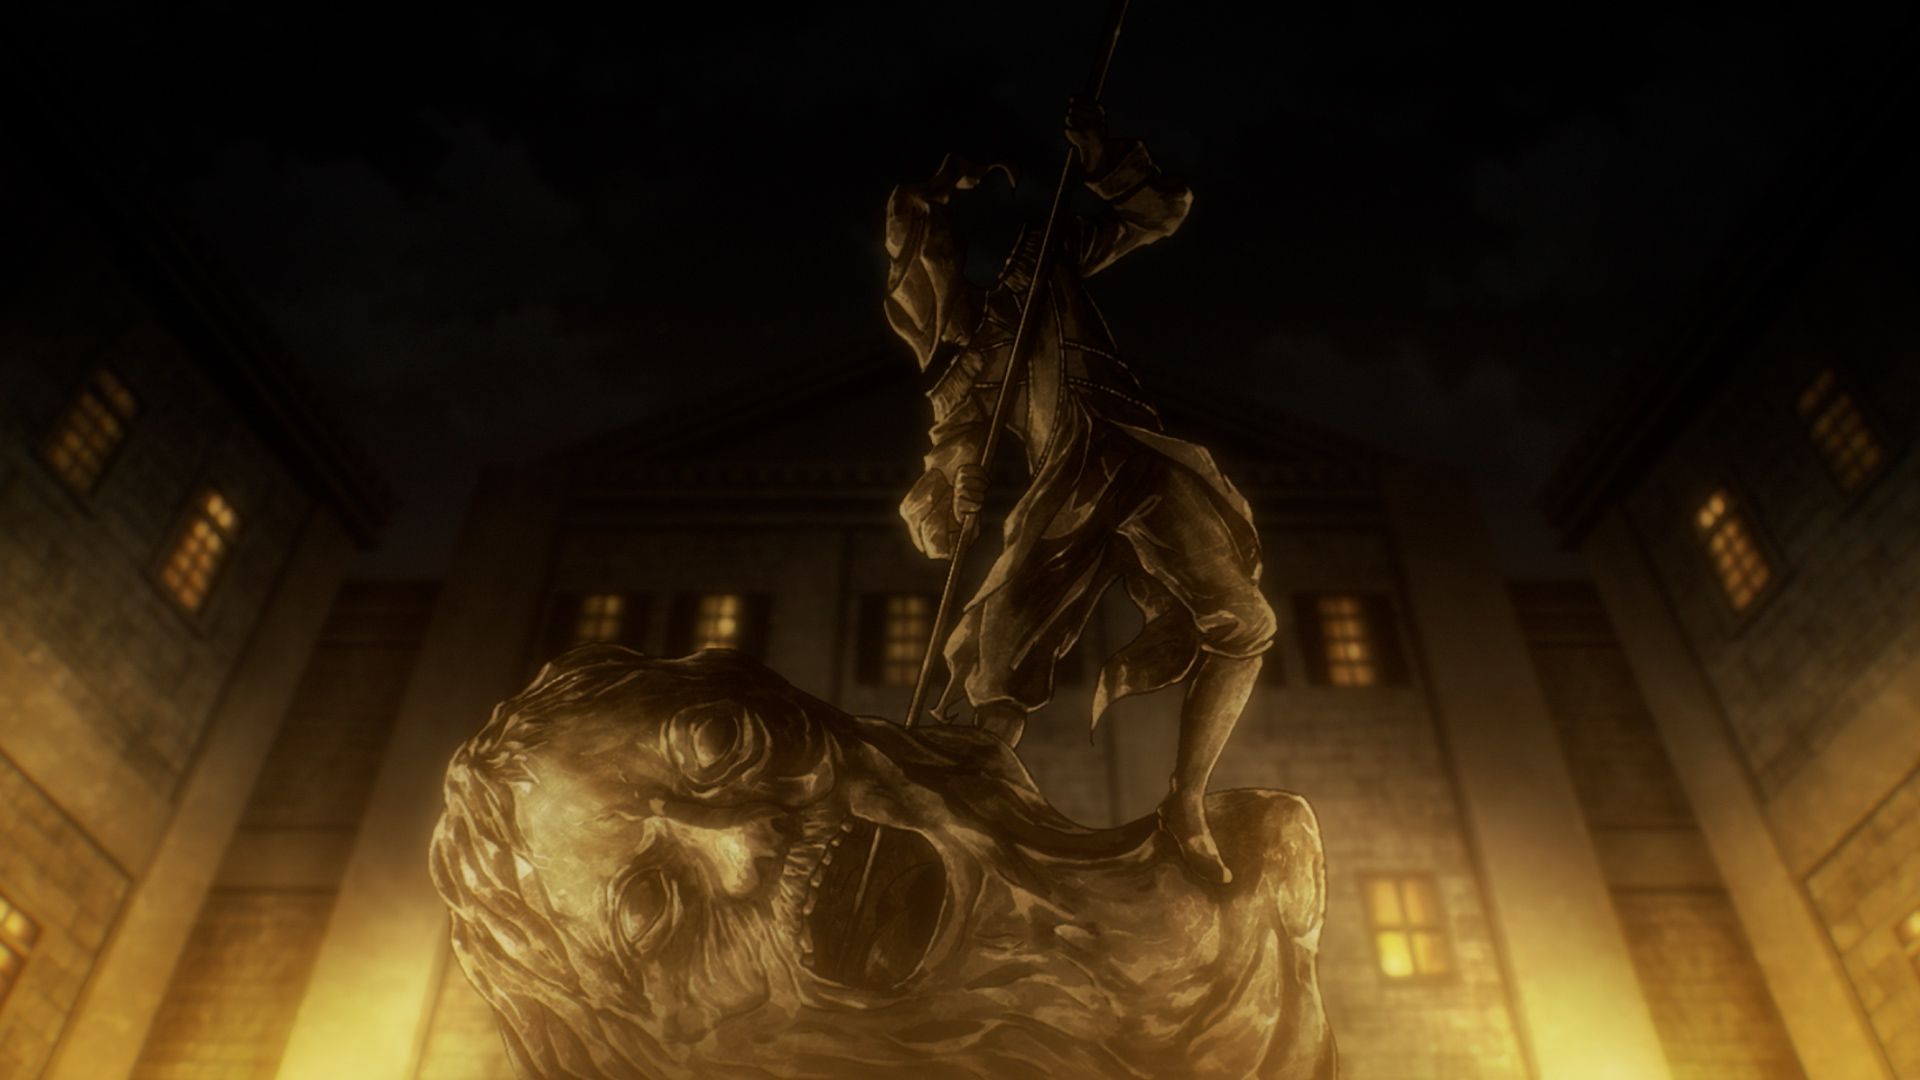 Watch Full Episodes of Attack on Titan, a Part of Toonami on Adult Swim